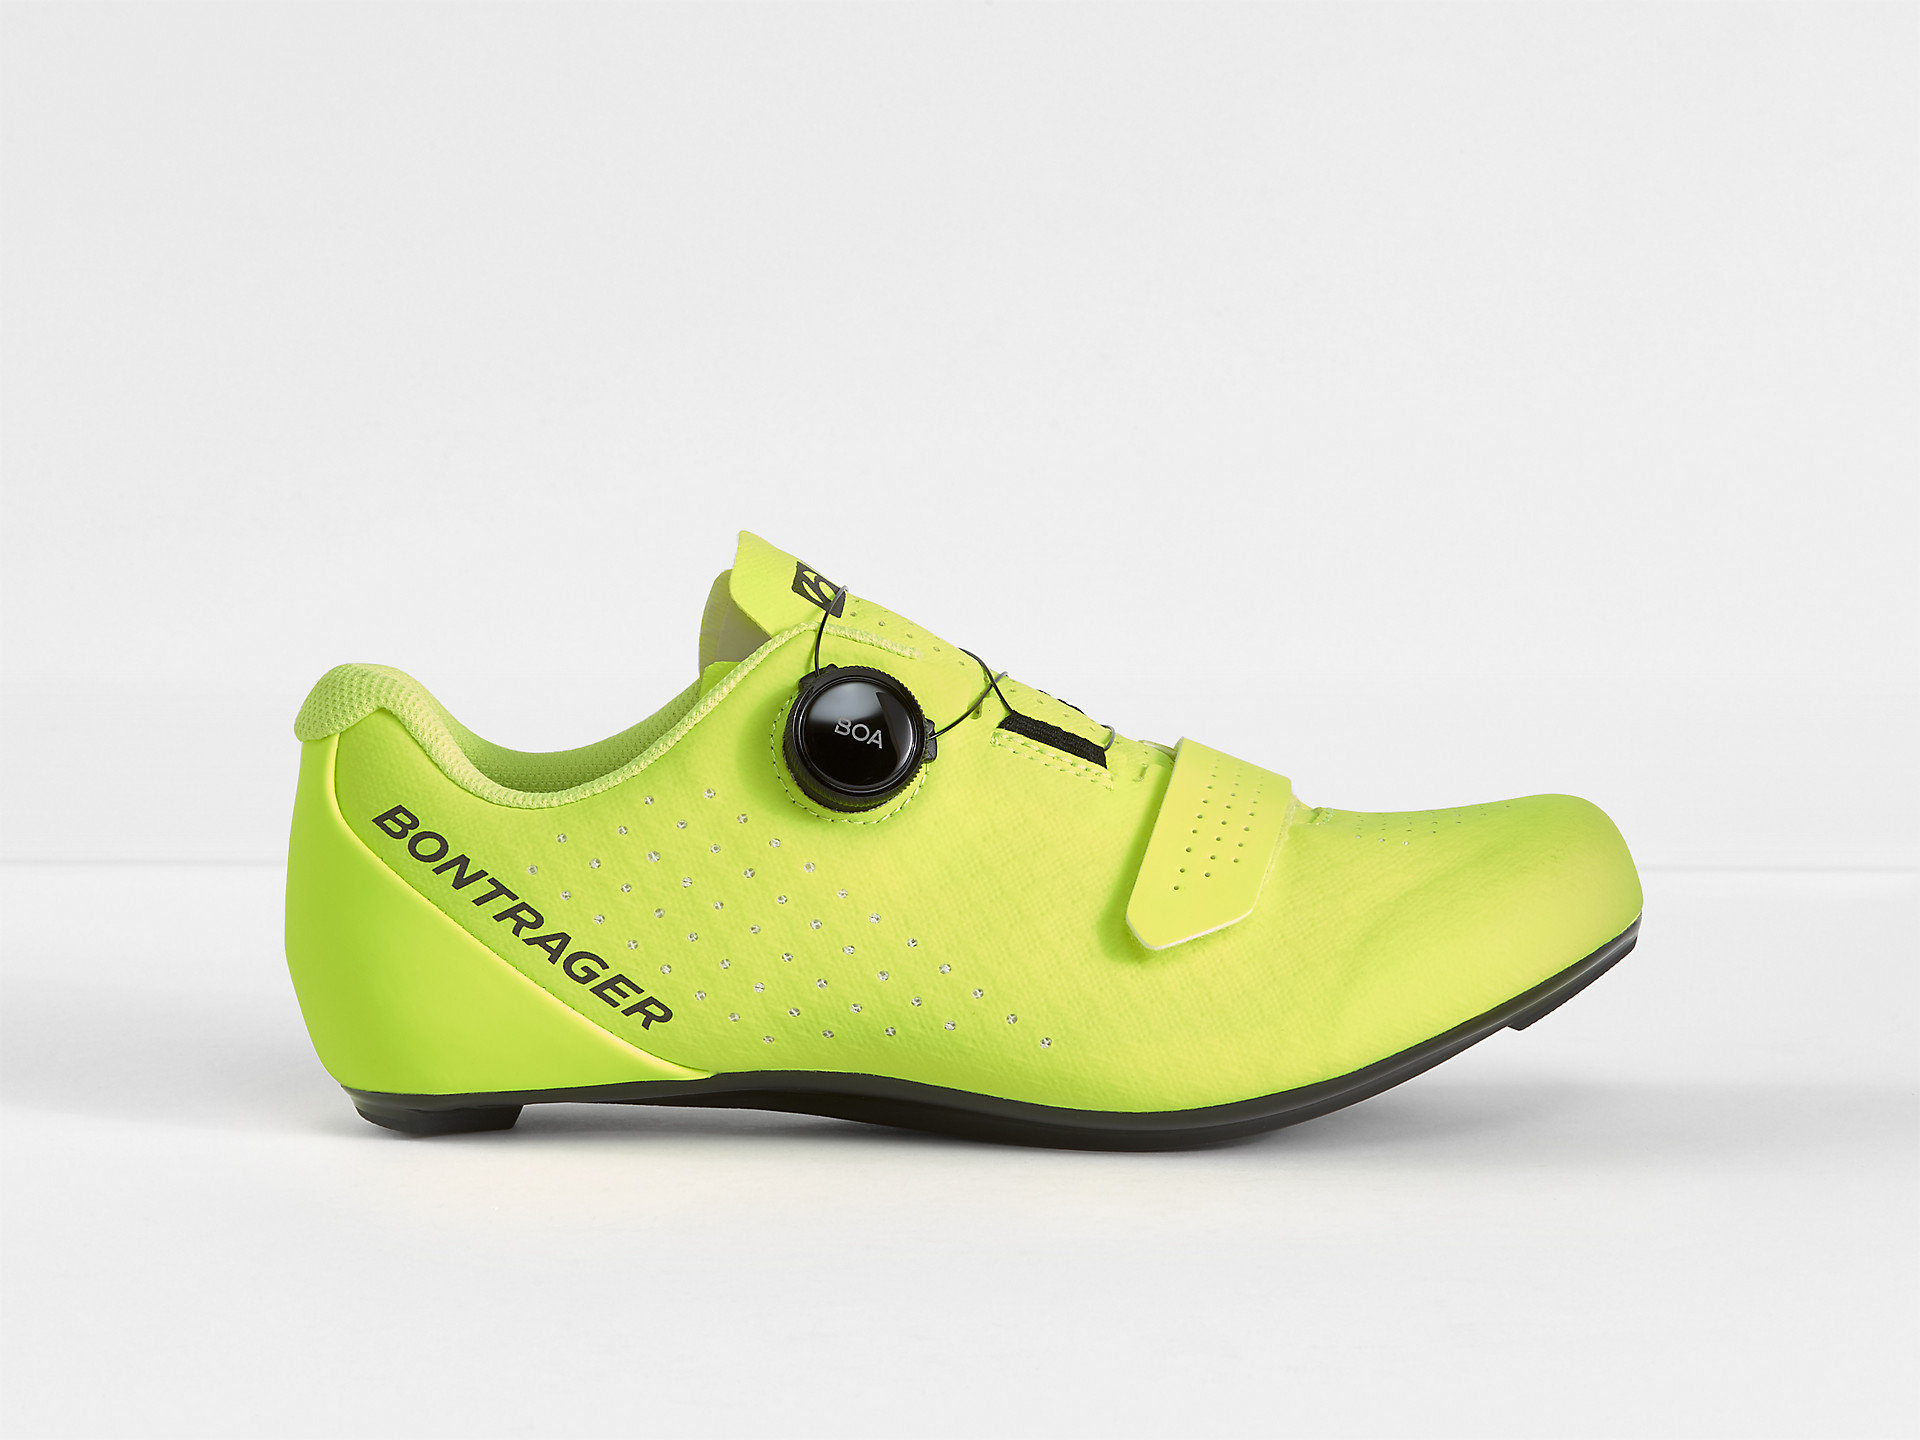 <a href="https://cycles-clement.be/product/chaussure-bont-circuit-race-42-yel/">CHAUSSURE BONT CIRCUIT RACE 42 YEL</a>